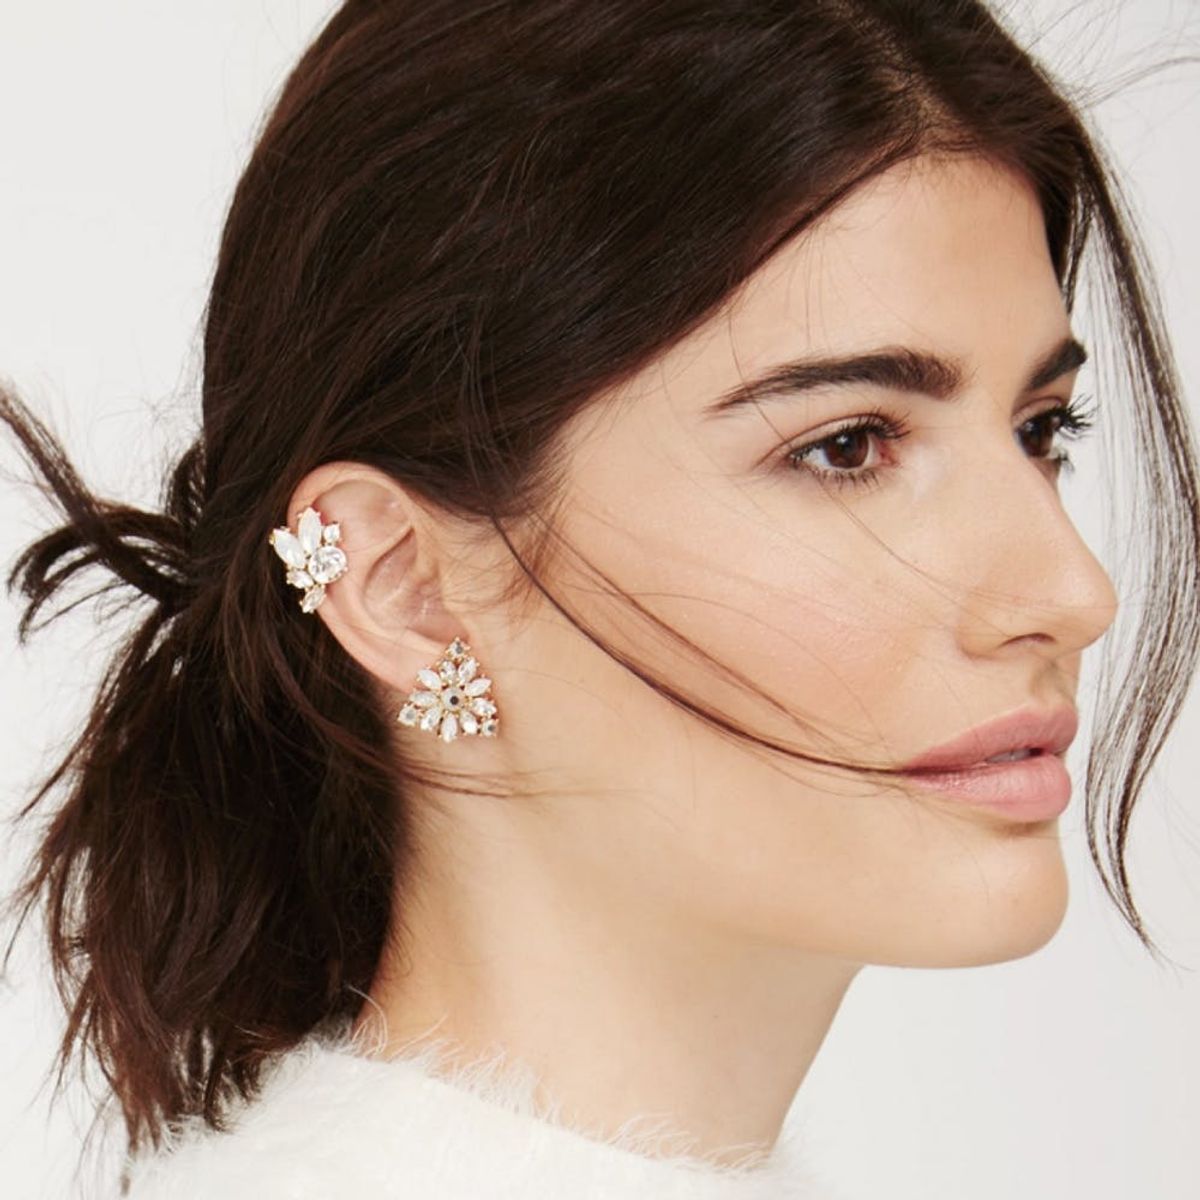 19 Pairs of Earrings for Every Type of Piercing